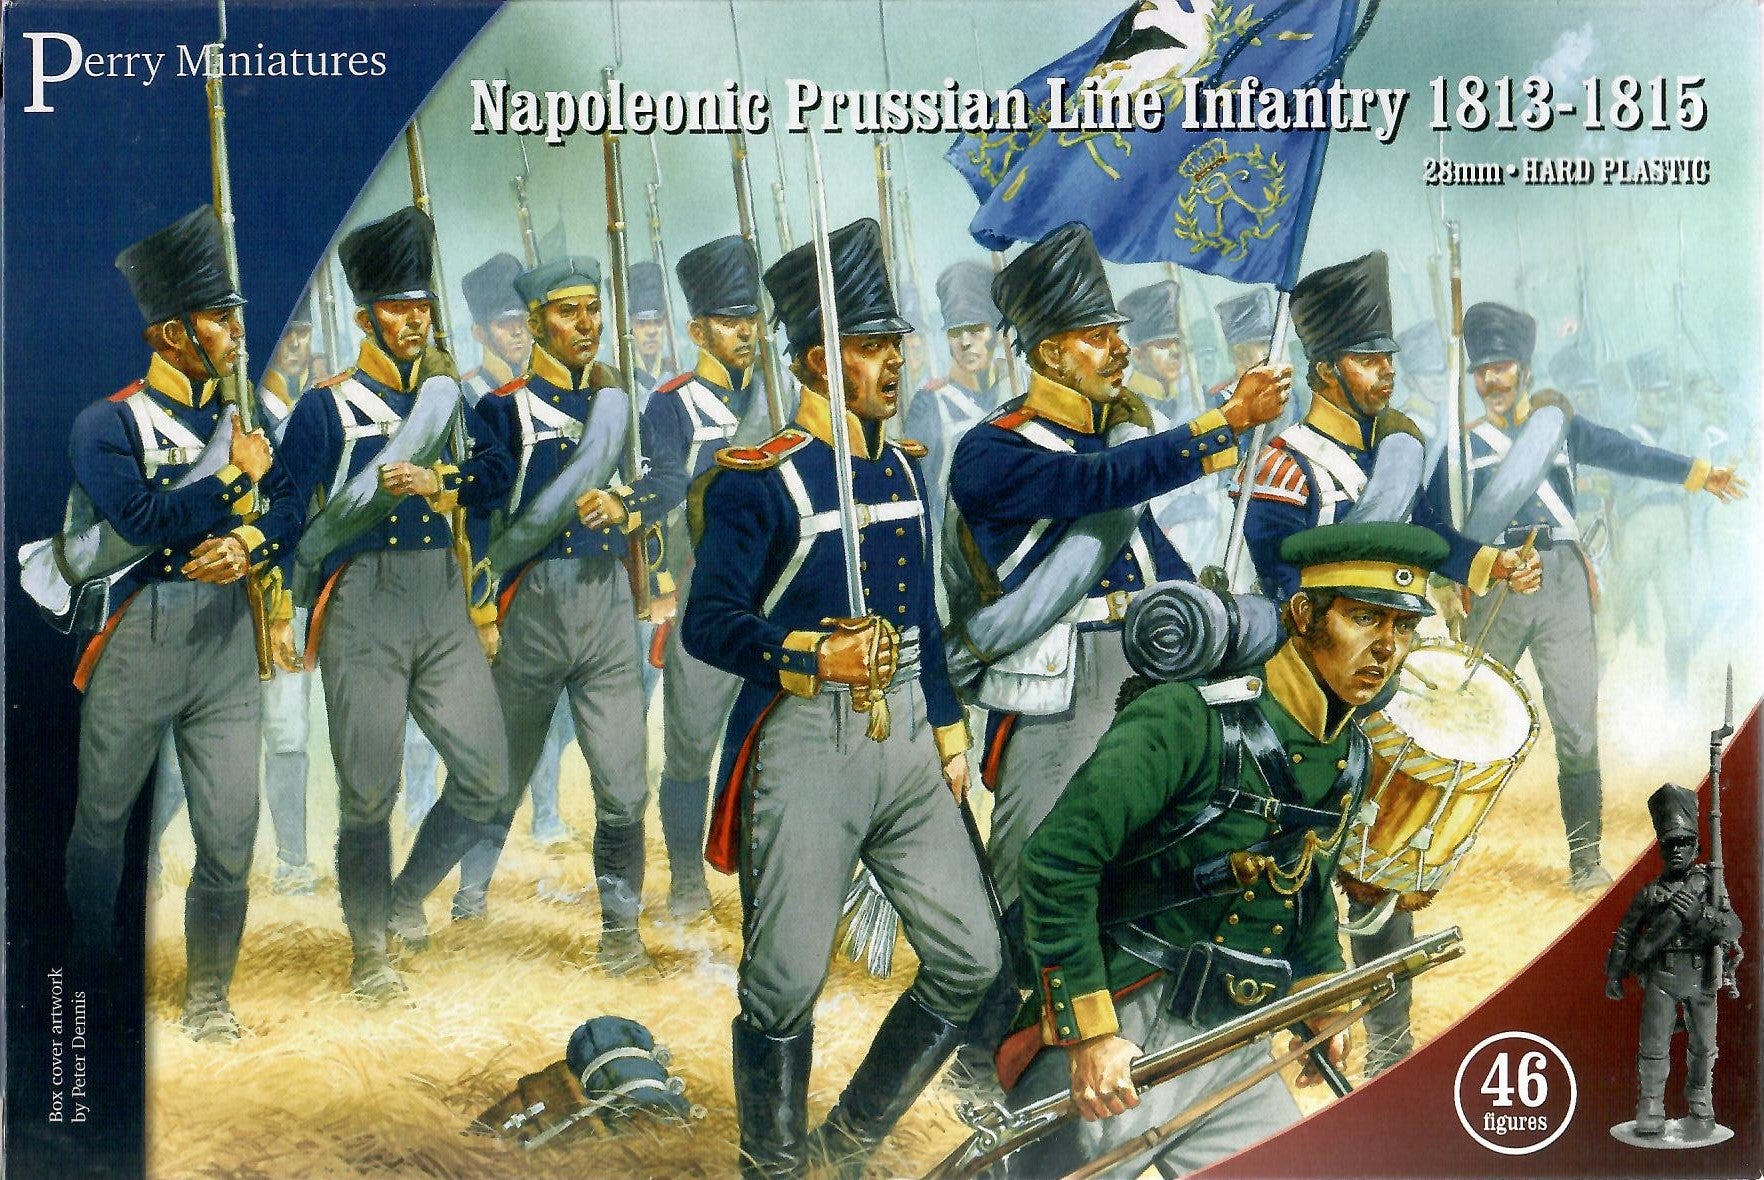 Perry Miniatures PRUSSIAN Napoleonic Infantry 28mm Hard PLASTIC BOX